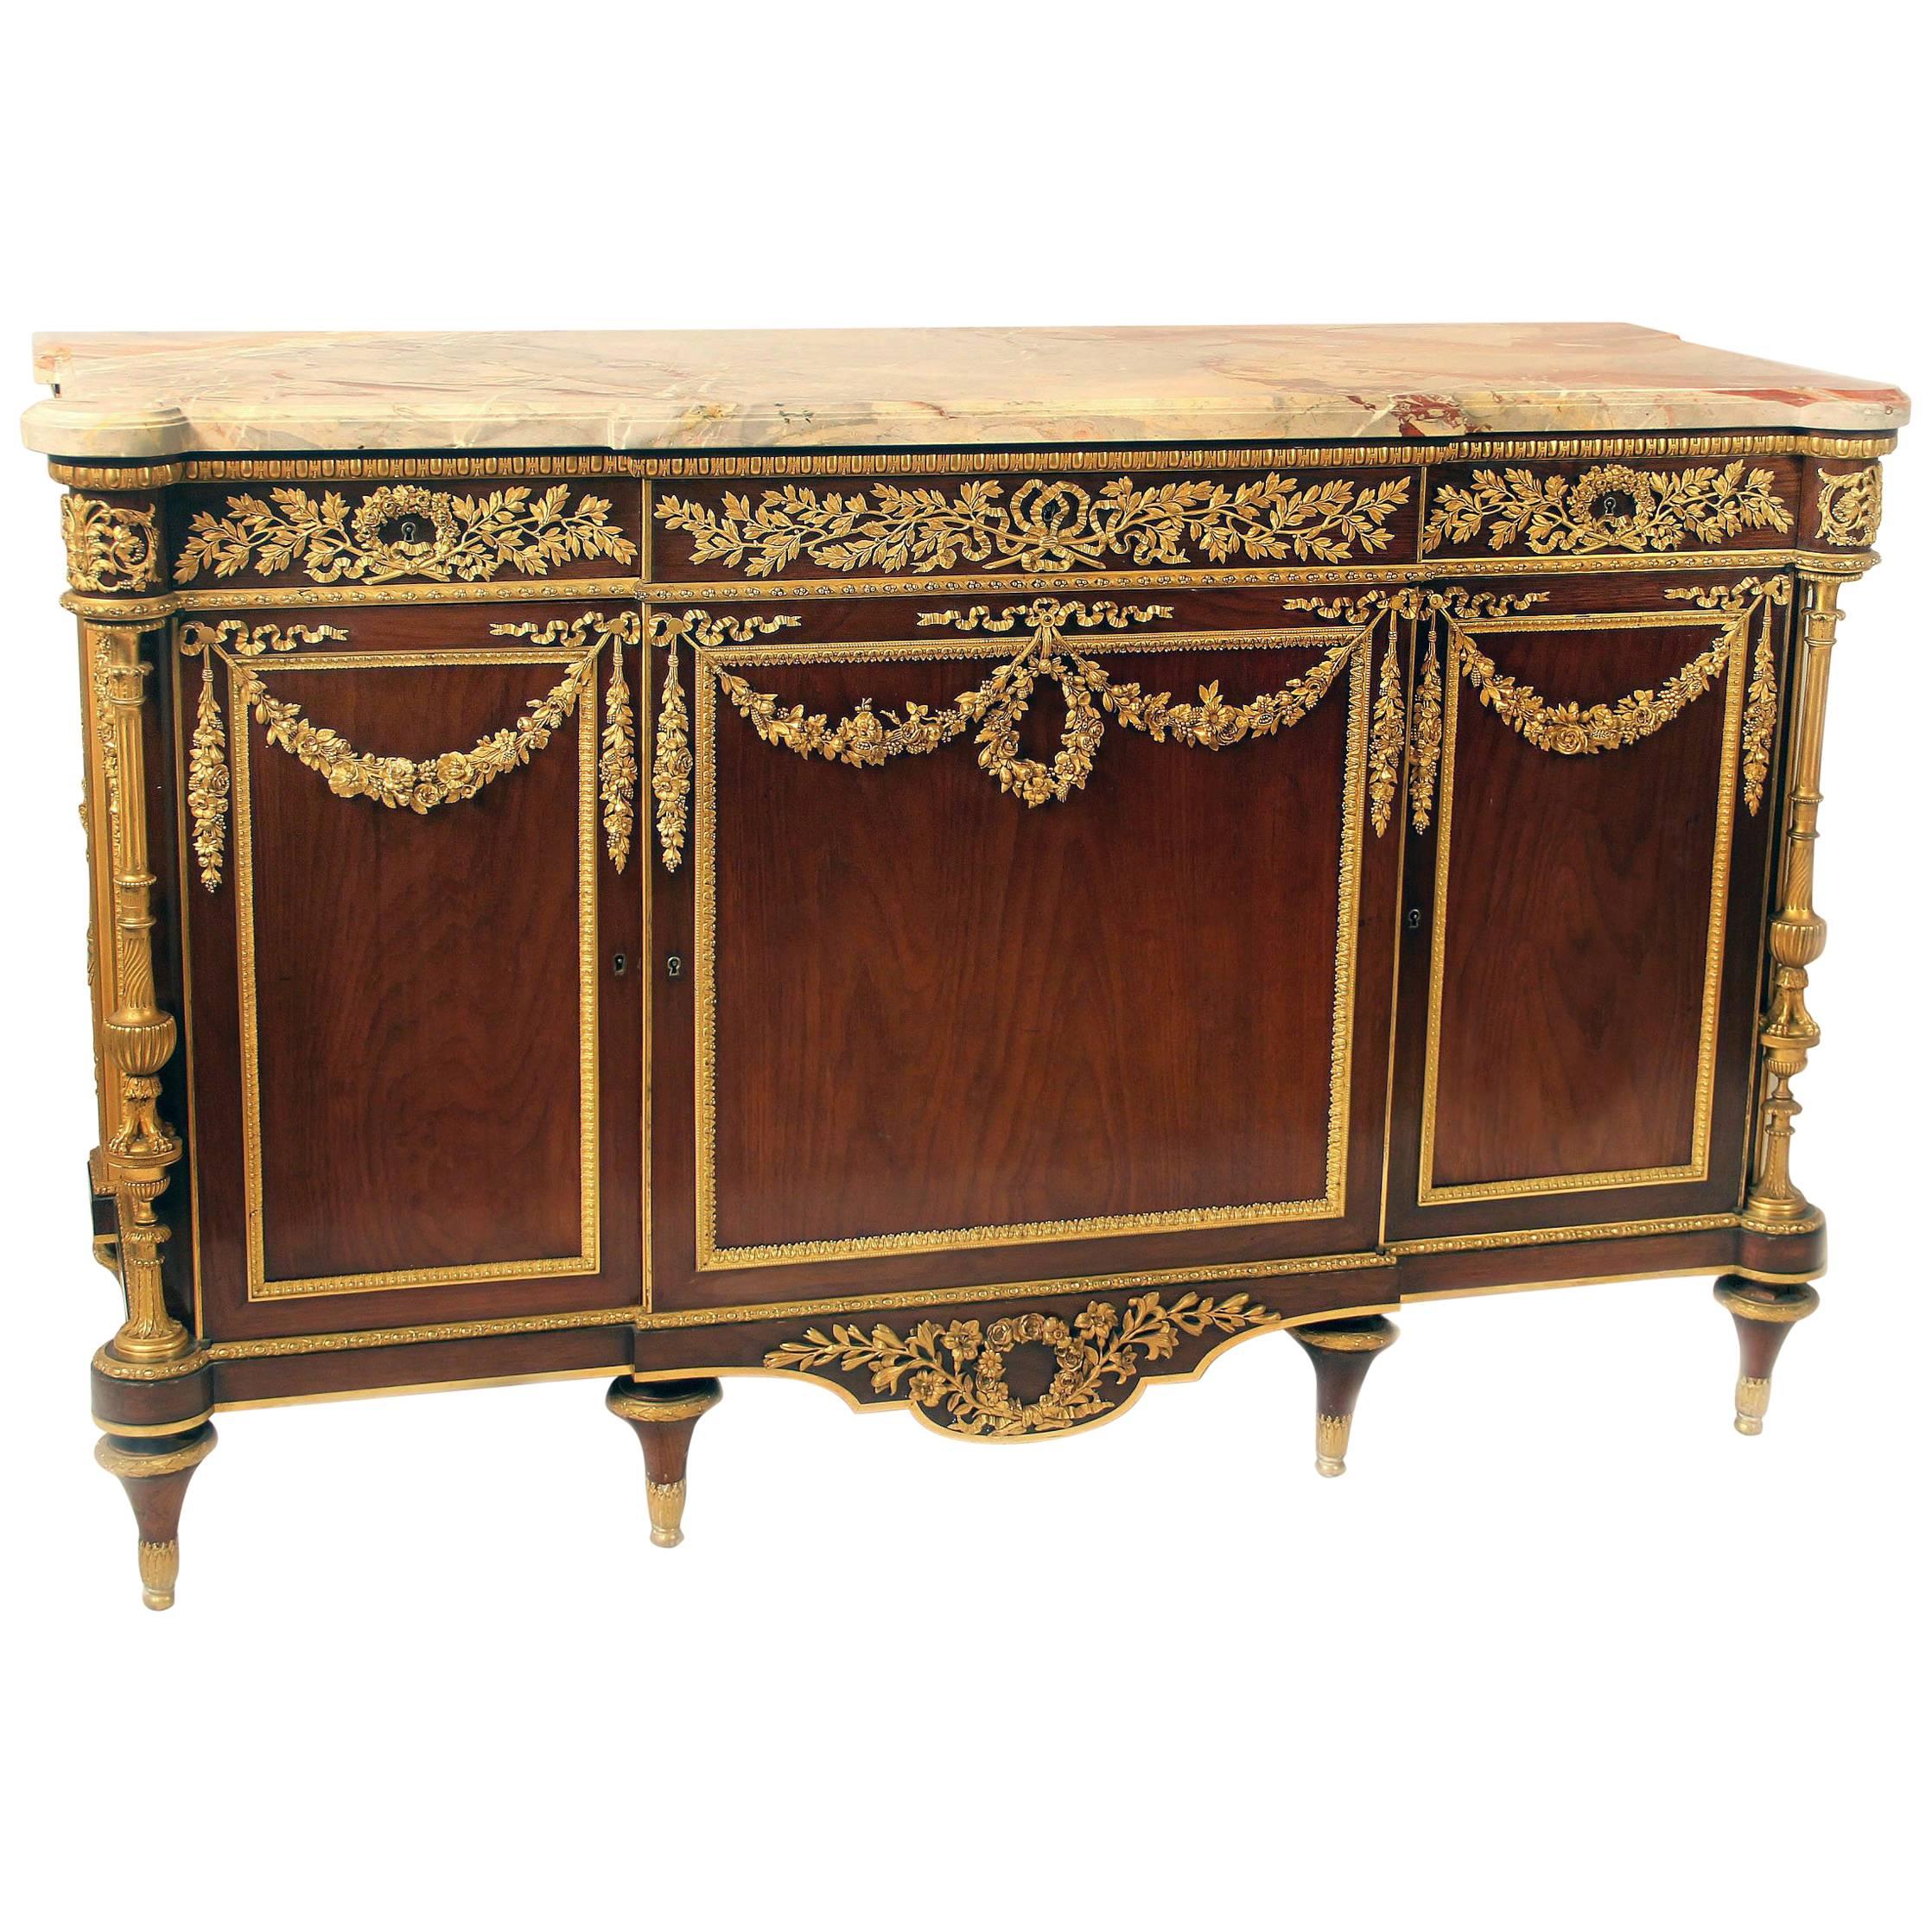 Exceptional Late 19th Century Gilt Bronze-Mounted Commode by Henry Dasson